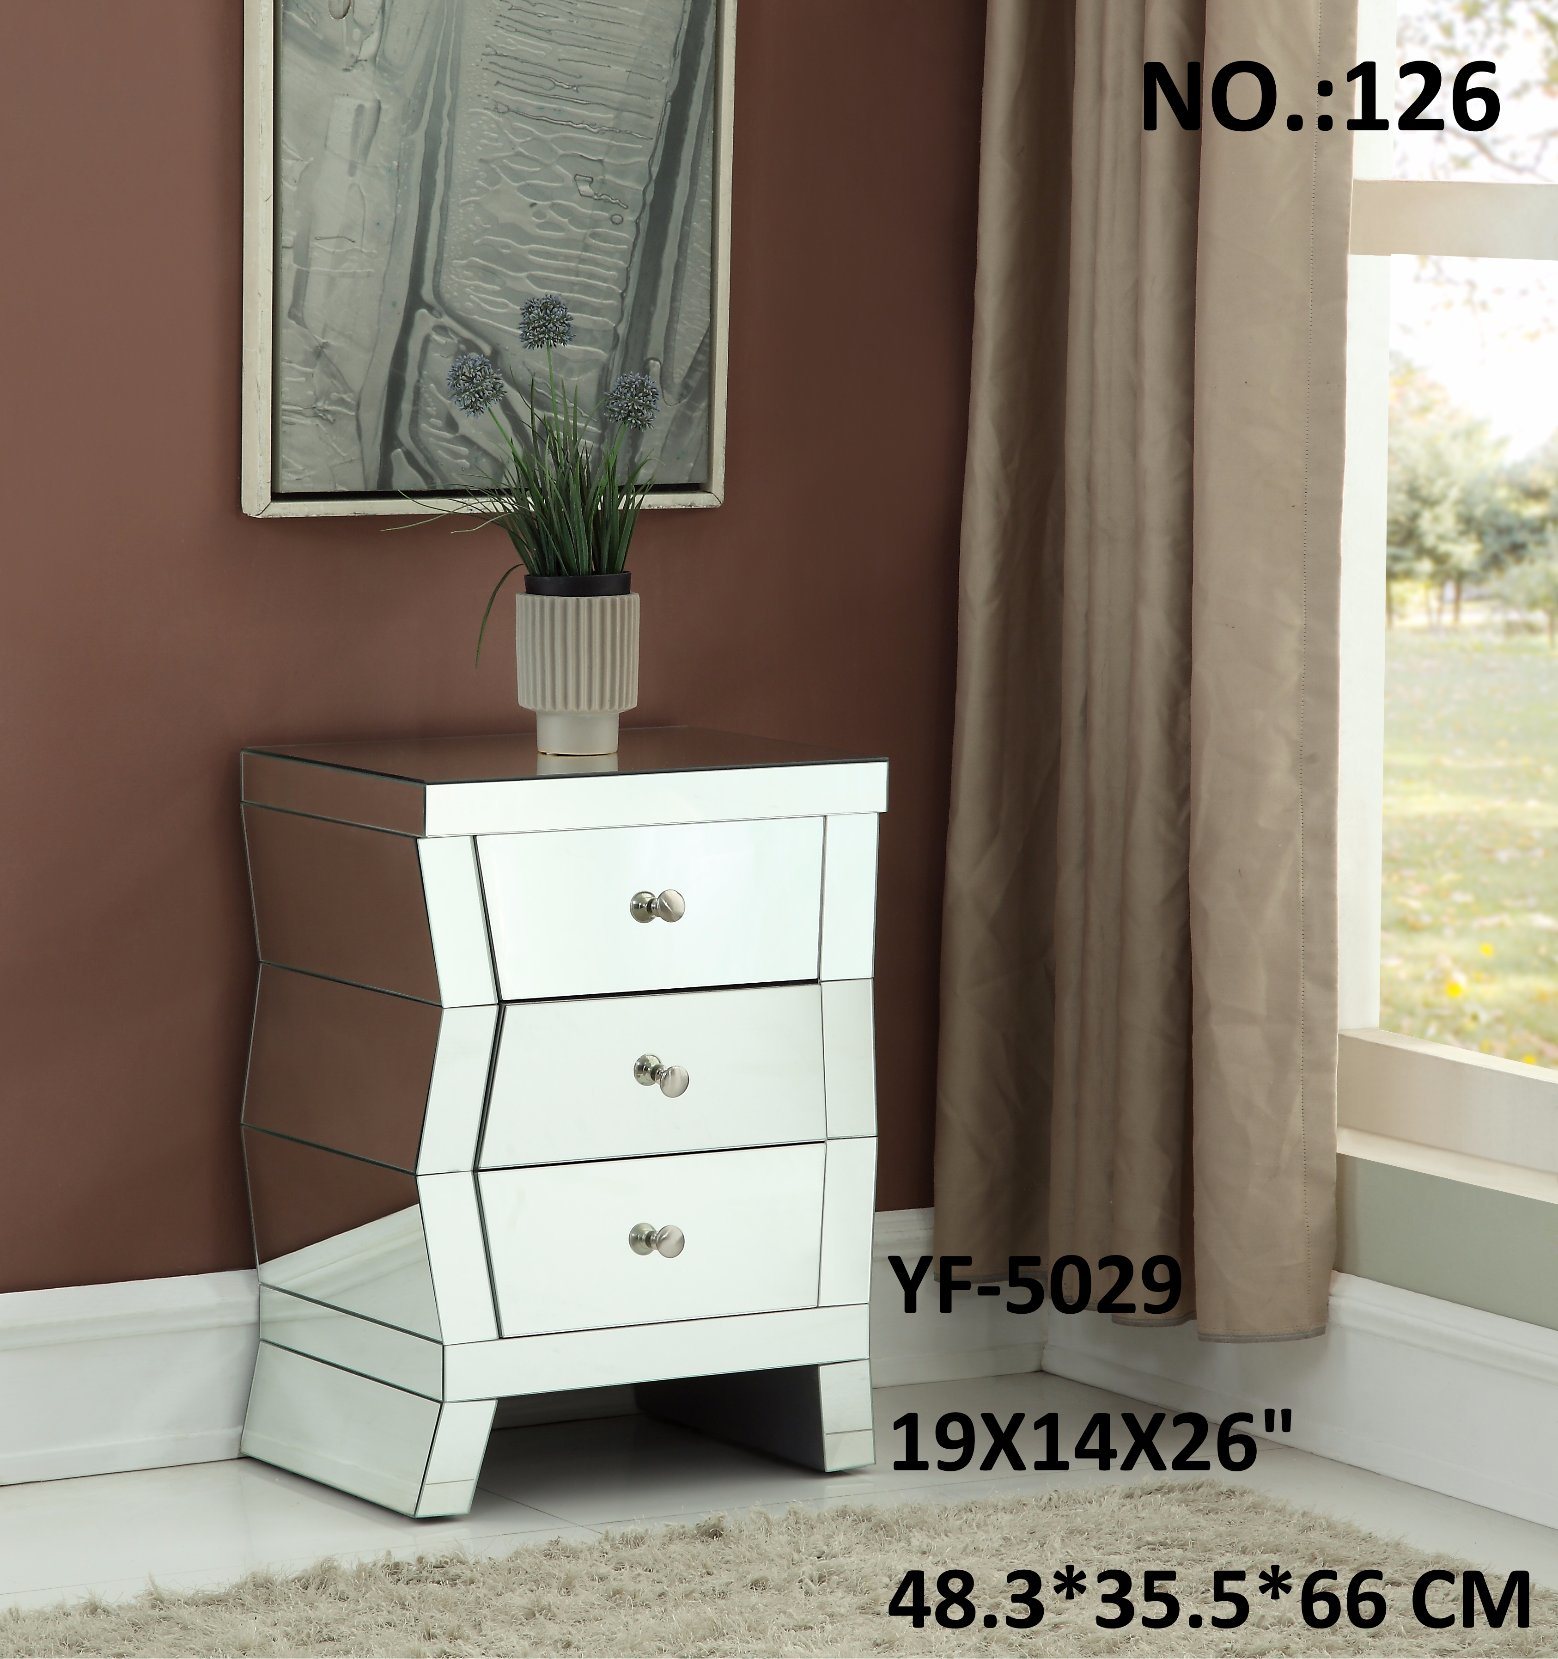 Venetian Mirror Bedside Tables of High Quality Home Furniture